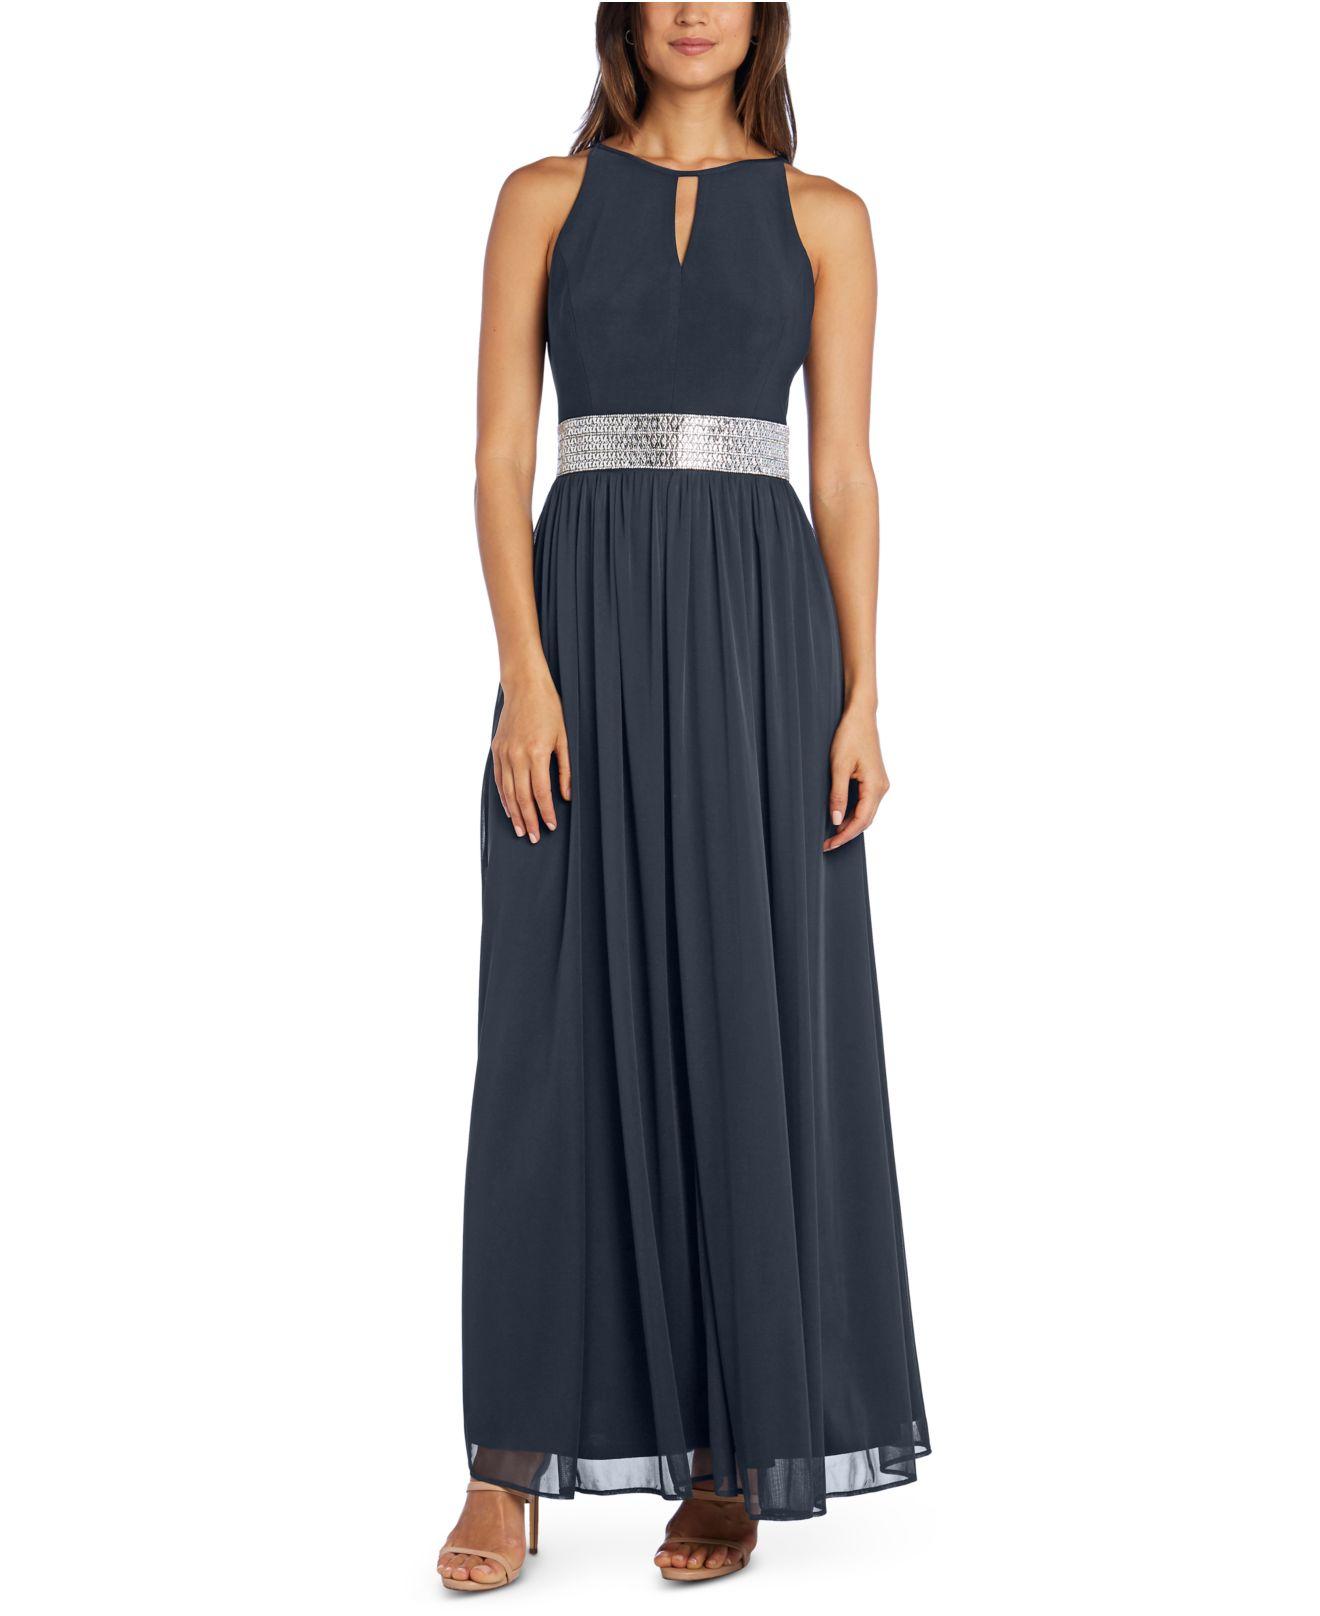 R & M Richards Synthetic Embellished Gown in Charcoal (Blue) - Lyst